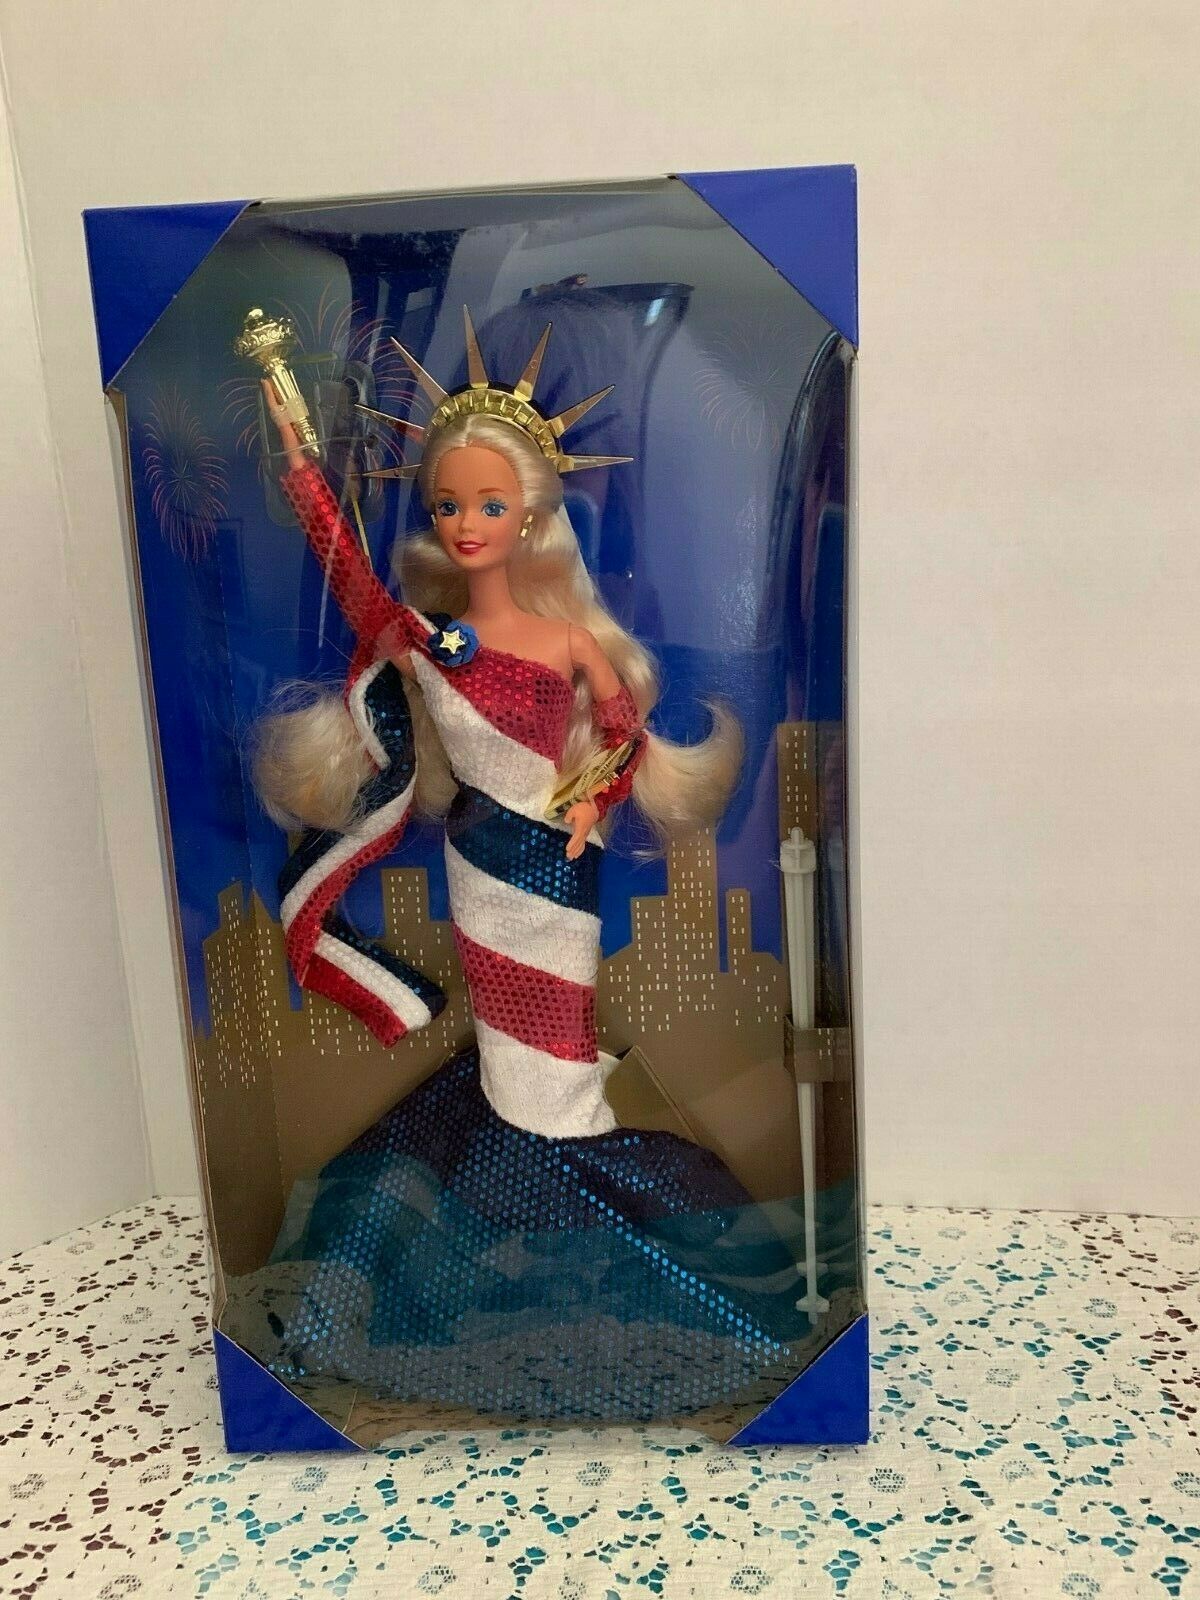 Statue of Liberty Barbie 14664, Circus star Barbie 13257 FAO Schwartz limited ed